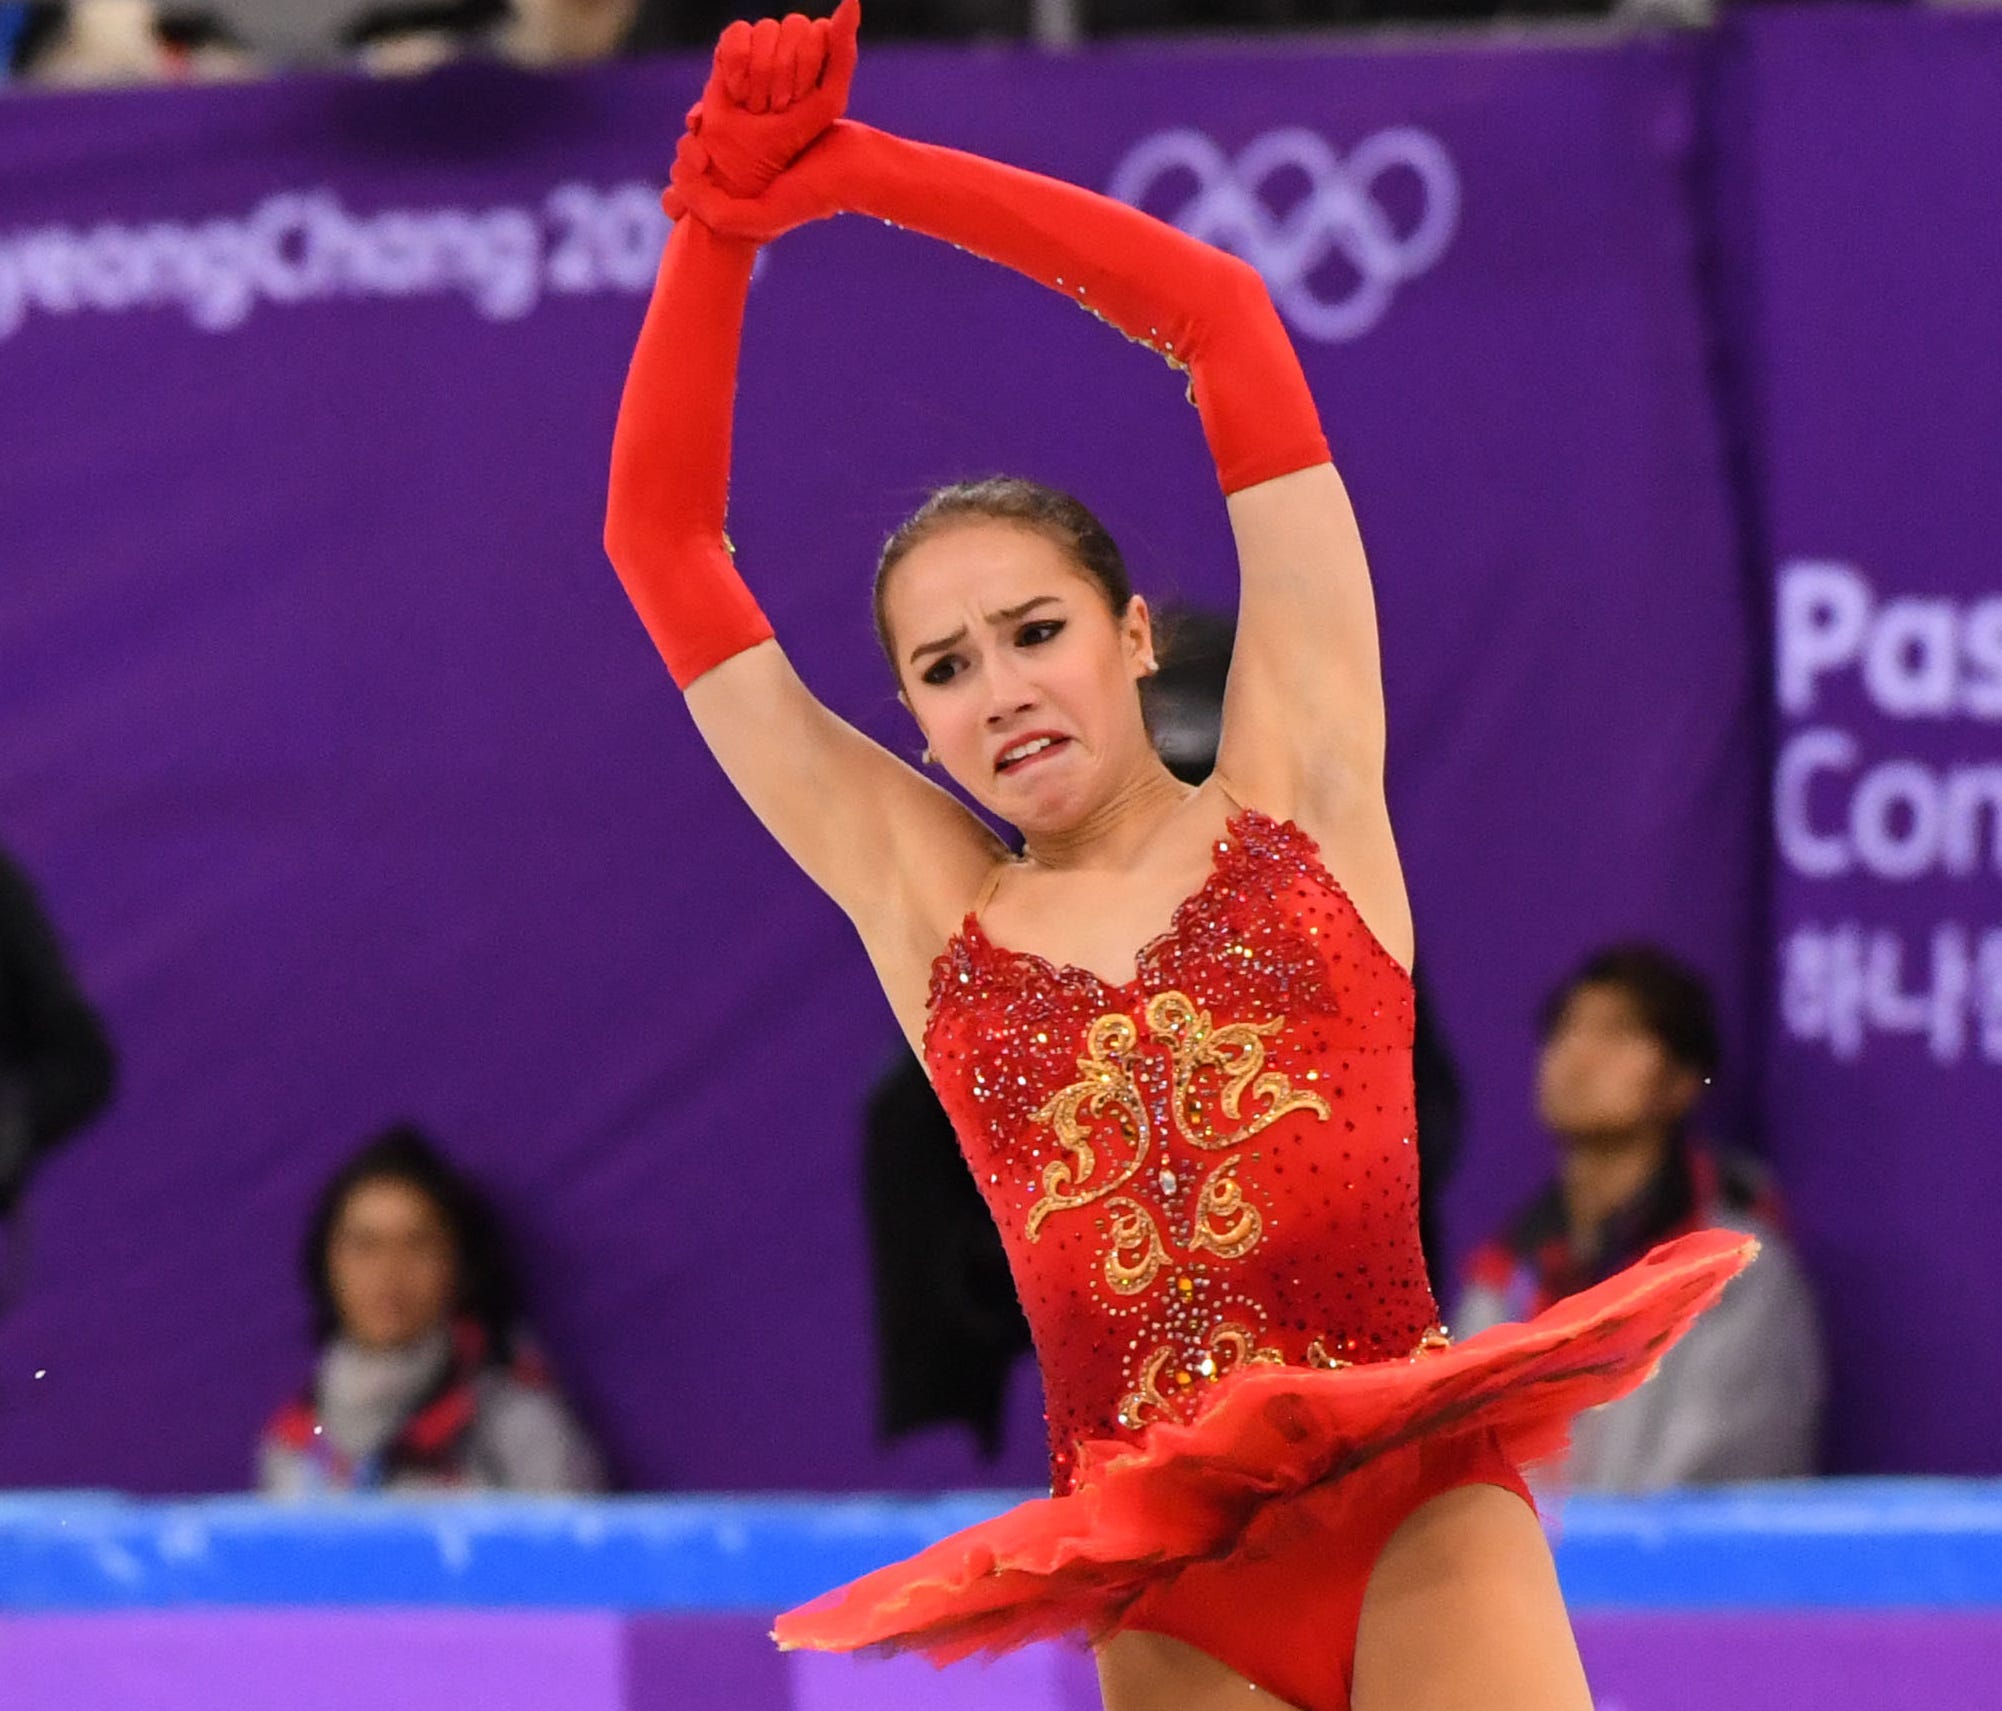 Medal favorite Alina Zagitova of Russia backloads her program with jumps which has sparked some criticism.